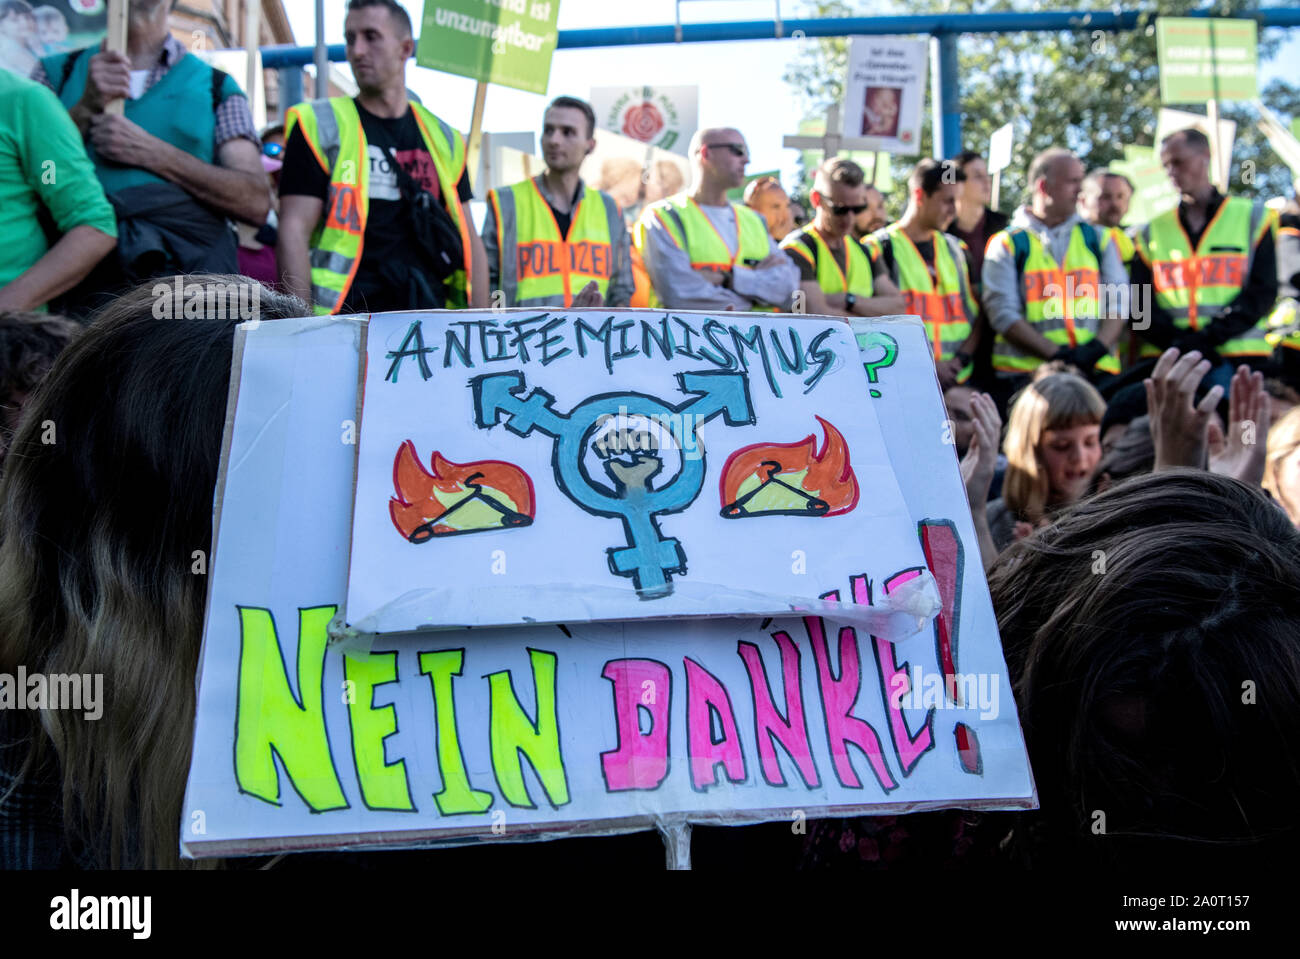 Berlin, Germany. 21st Sep, 2019. Counter-demonstrators have stopped the so-called 'March for Life' with a sit-down blockade and show a sign with the inscription 'Antifeminism No Thank You! According to the organizer, the association Bundesverband Lebensrecht, the Catholic Church, as well as doctors' and lawyers' associations participated in the 'March for Life'. Hundreds of people demonstrated in Berlin-Mitte against the demonstration of anti-abortion activists. Credit: Paul Zinken/dpa/Alamy Live News Stock Photo